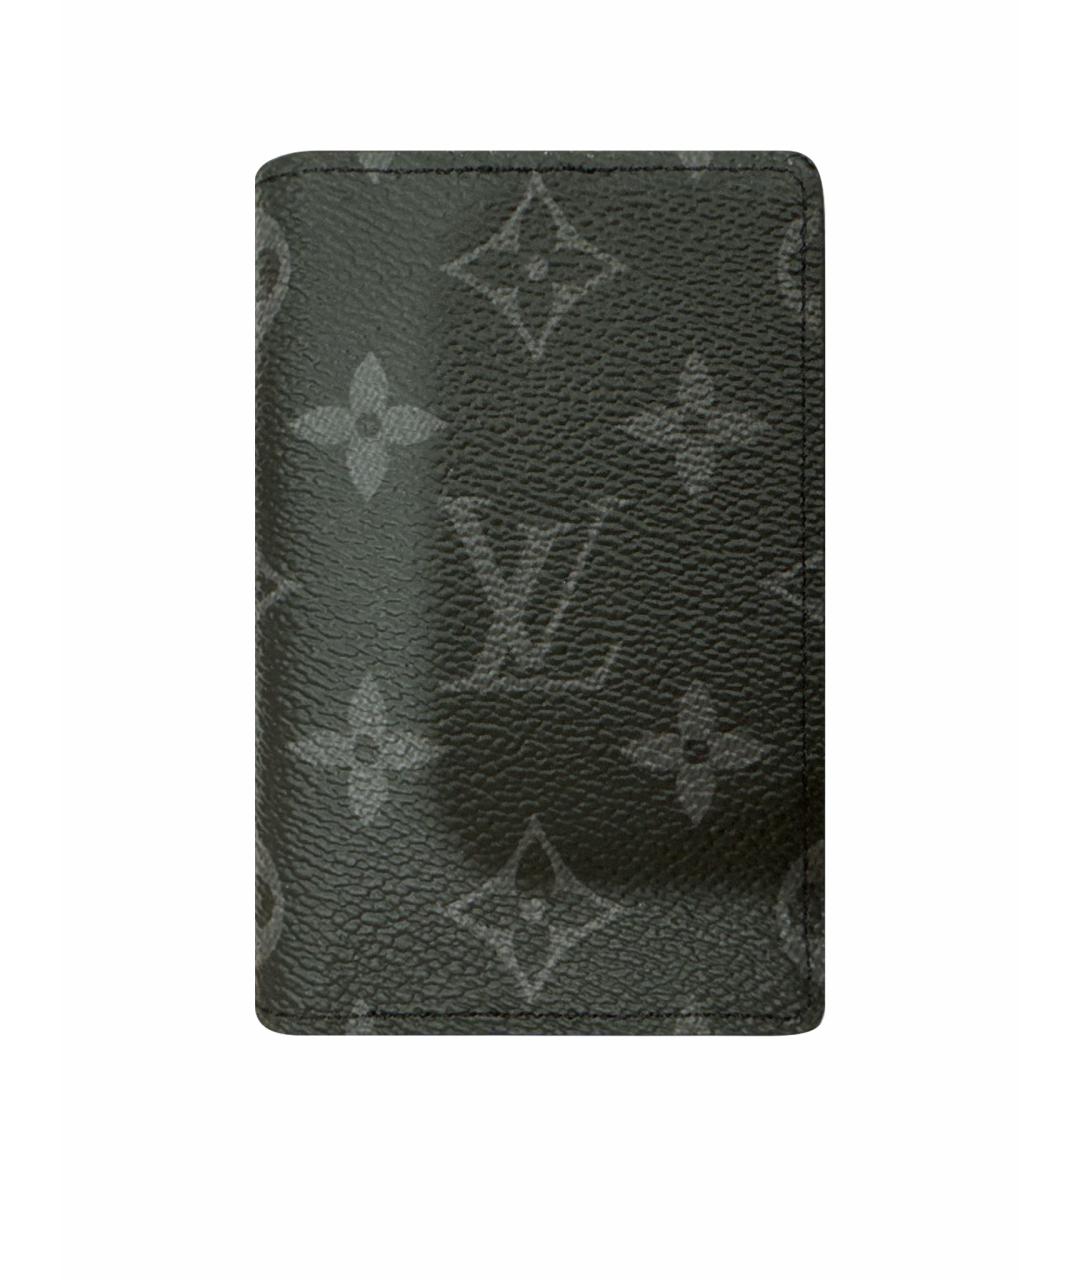 LOUIS VUITTON PRE-OWNED Черный кардхолдер, фото 1